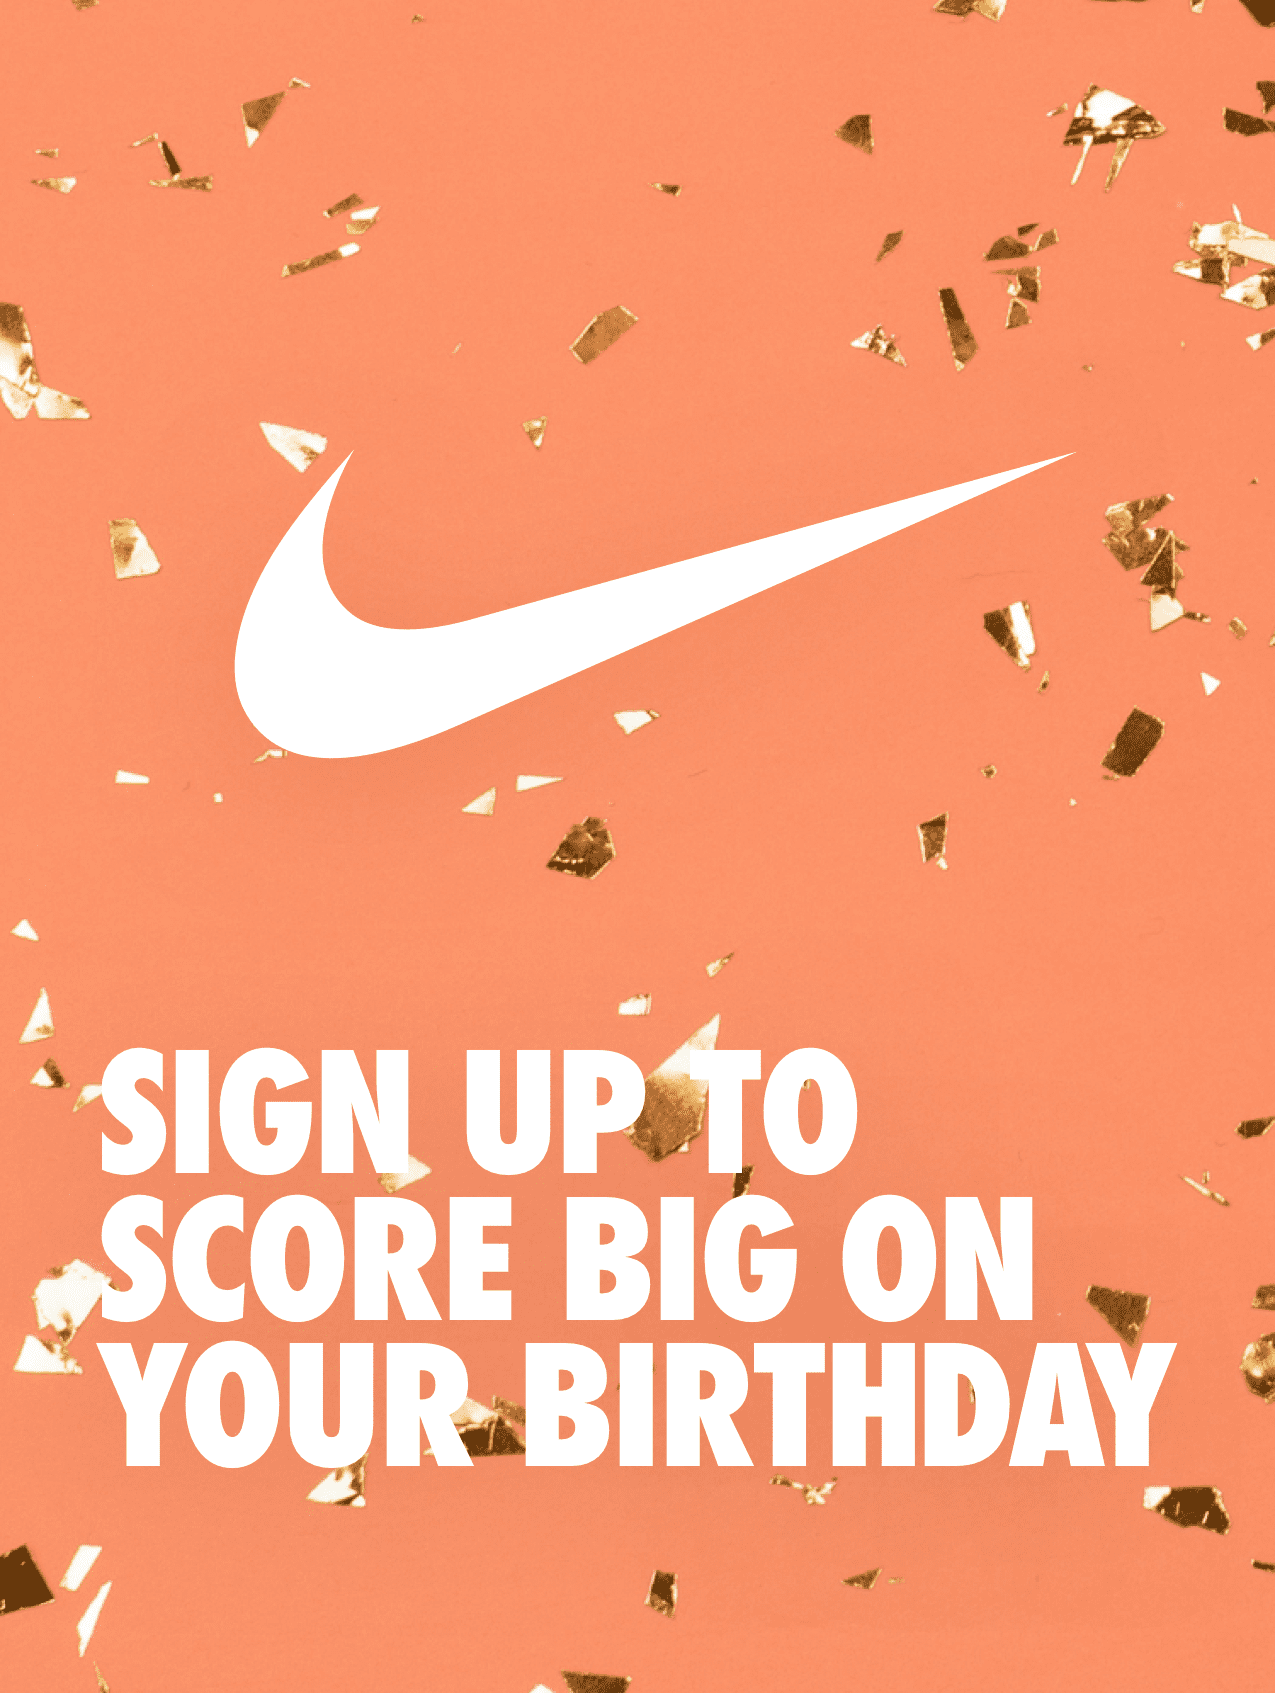 your birthday? We got a Nike Email Archive